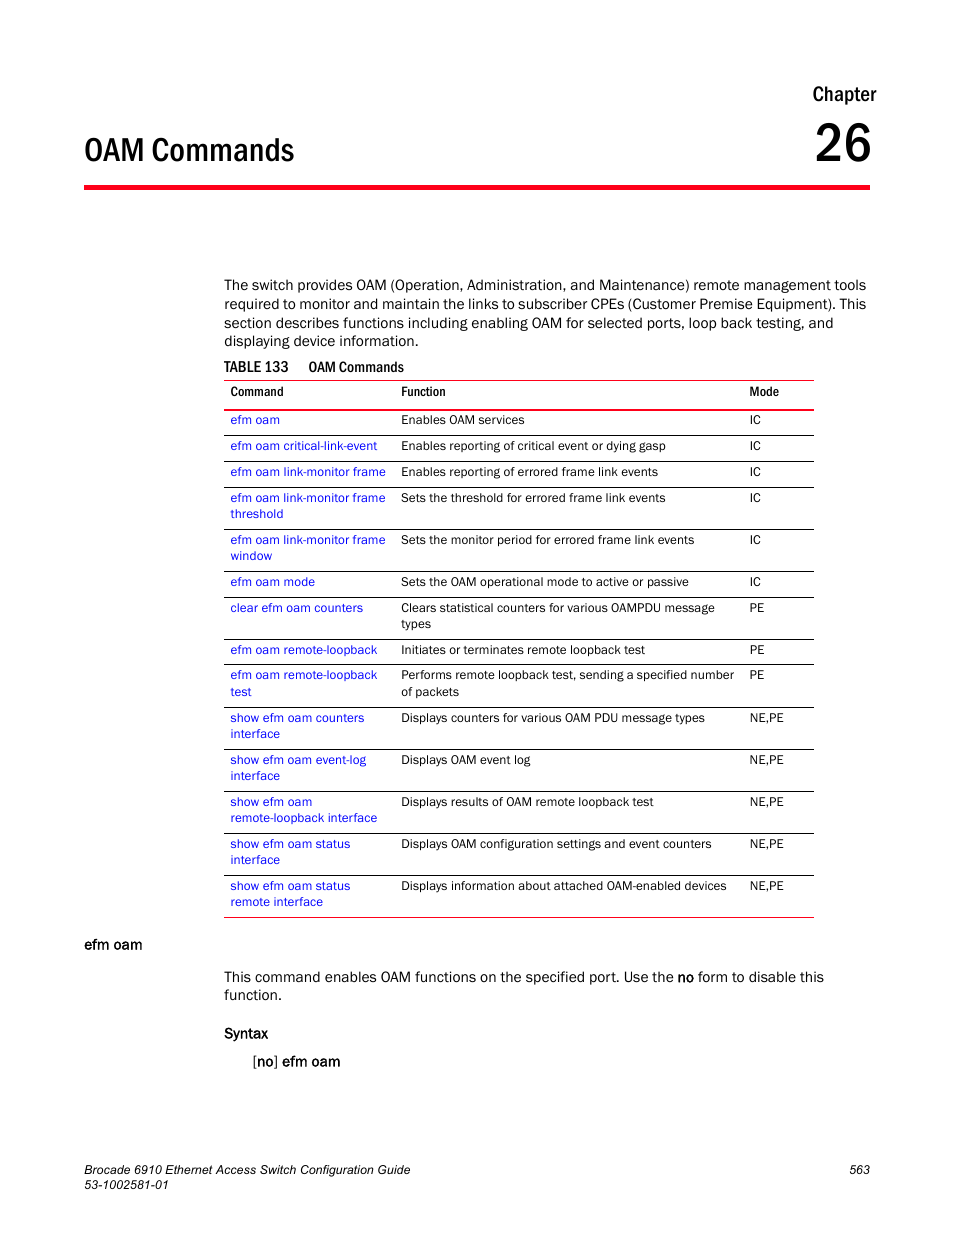 Oam commands, Efm oam, Chapter 26 | Table 133, Chapter | Brocade Communications Systems Brocate Ethernet Access Switch 6910 User Manual | Page 613 / 1200